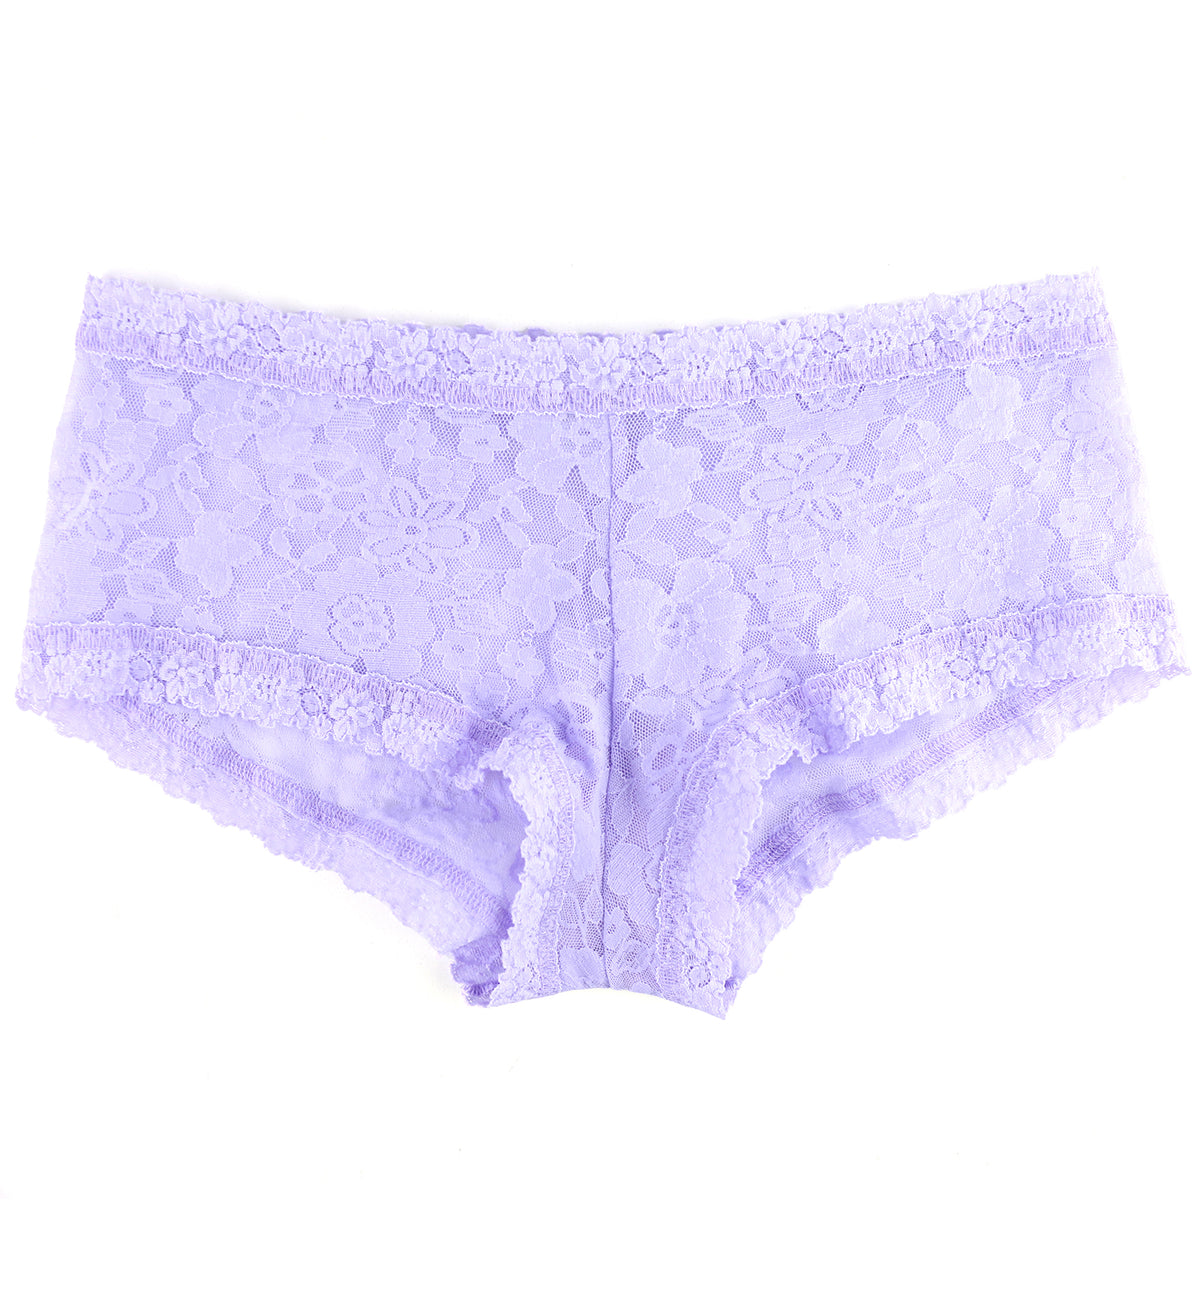 Hanky Panky Daily Lace Boyshort (771201P),X-Small,Lilac Bloom - Lilac Bloom,X-Small